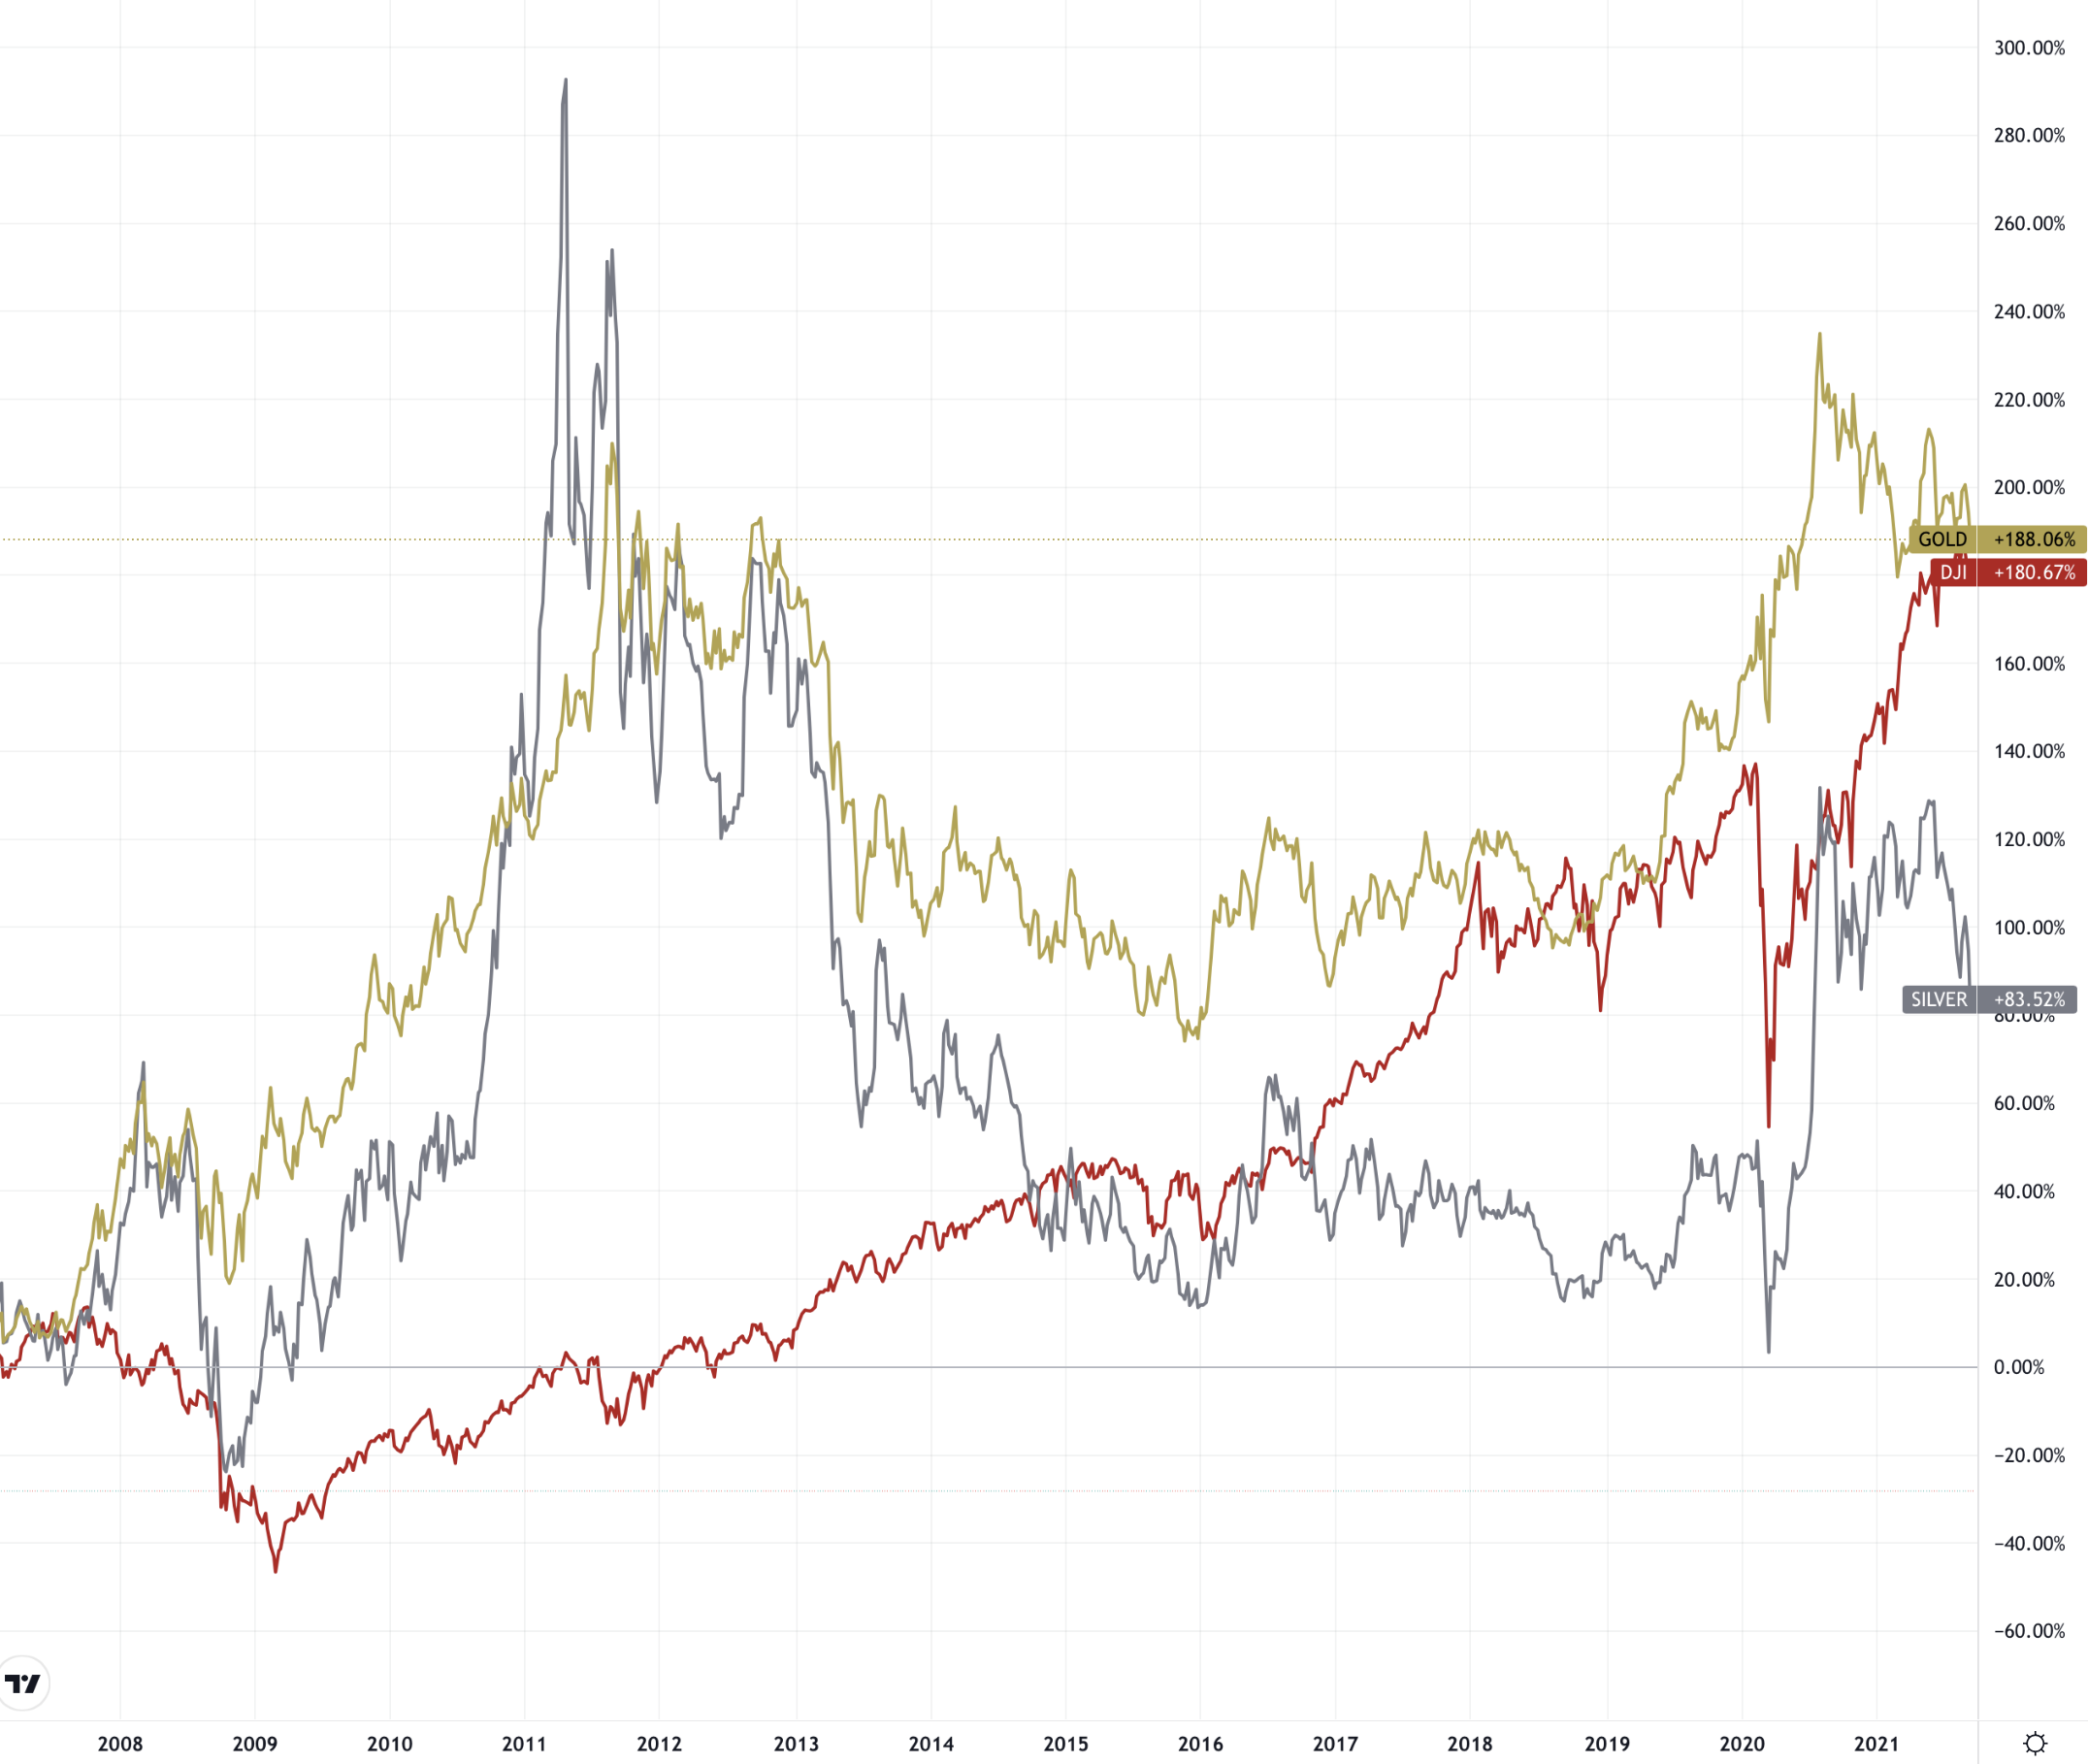 overlay line chart showing gold, silver and stocks since 2007